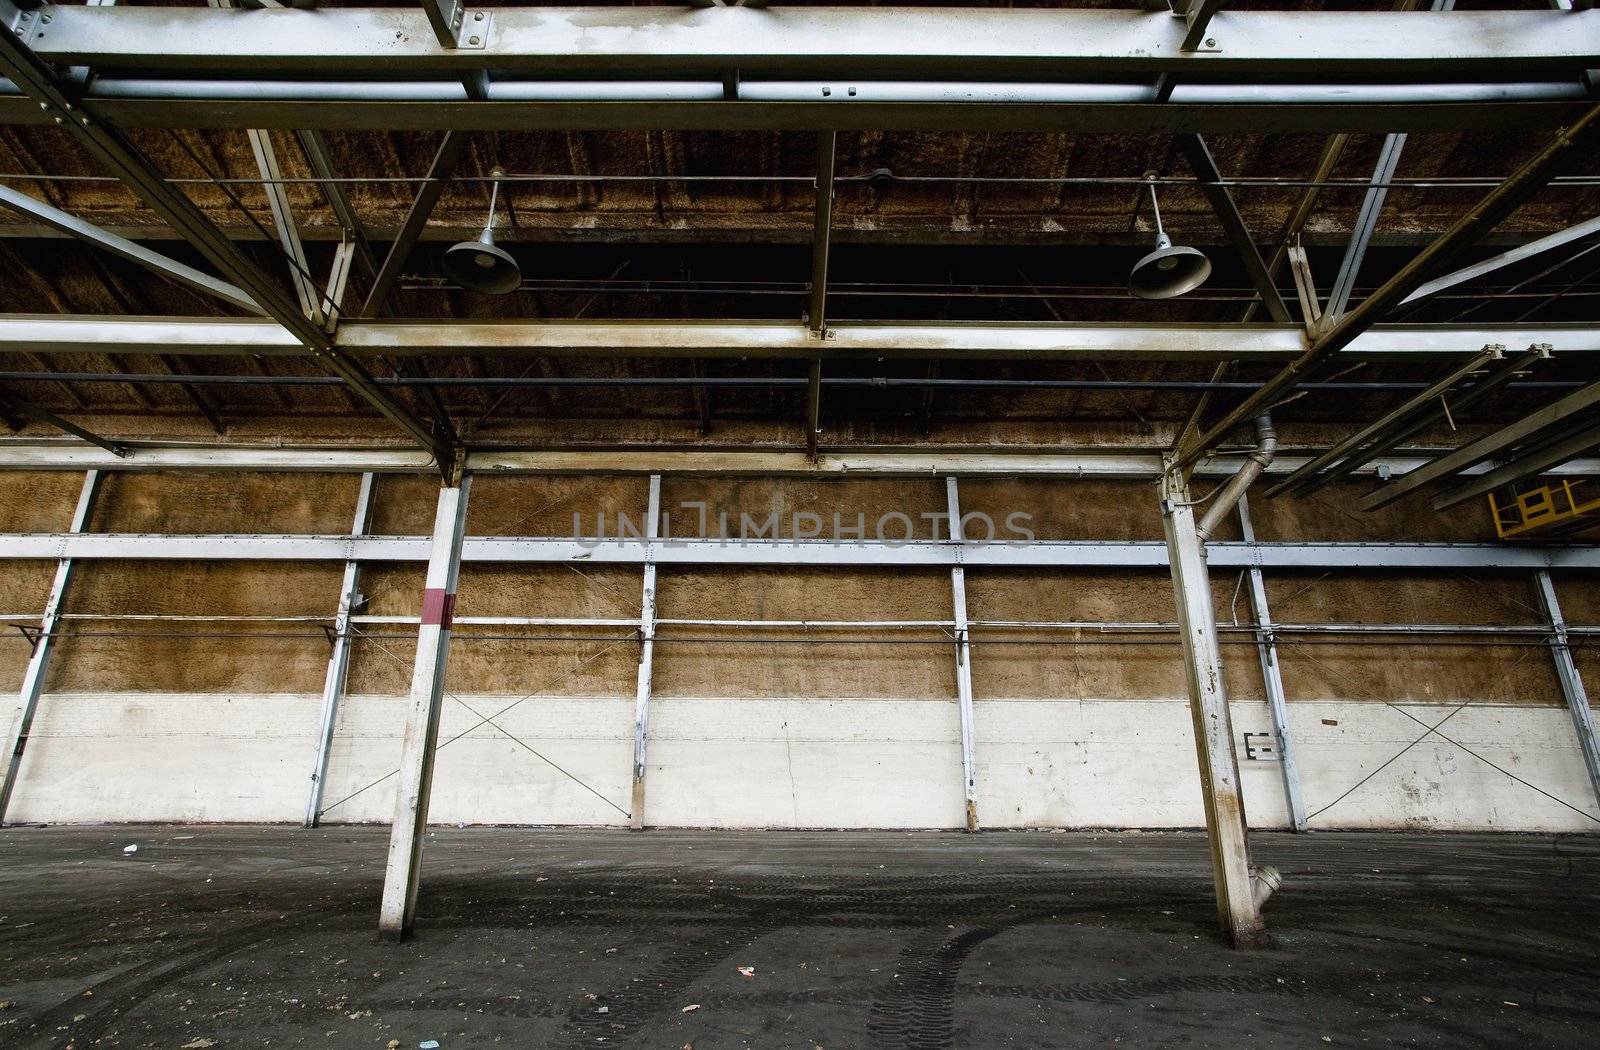 Interior of an empty and abandoned industrial building with exposed girders.